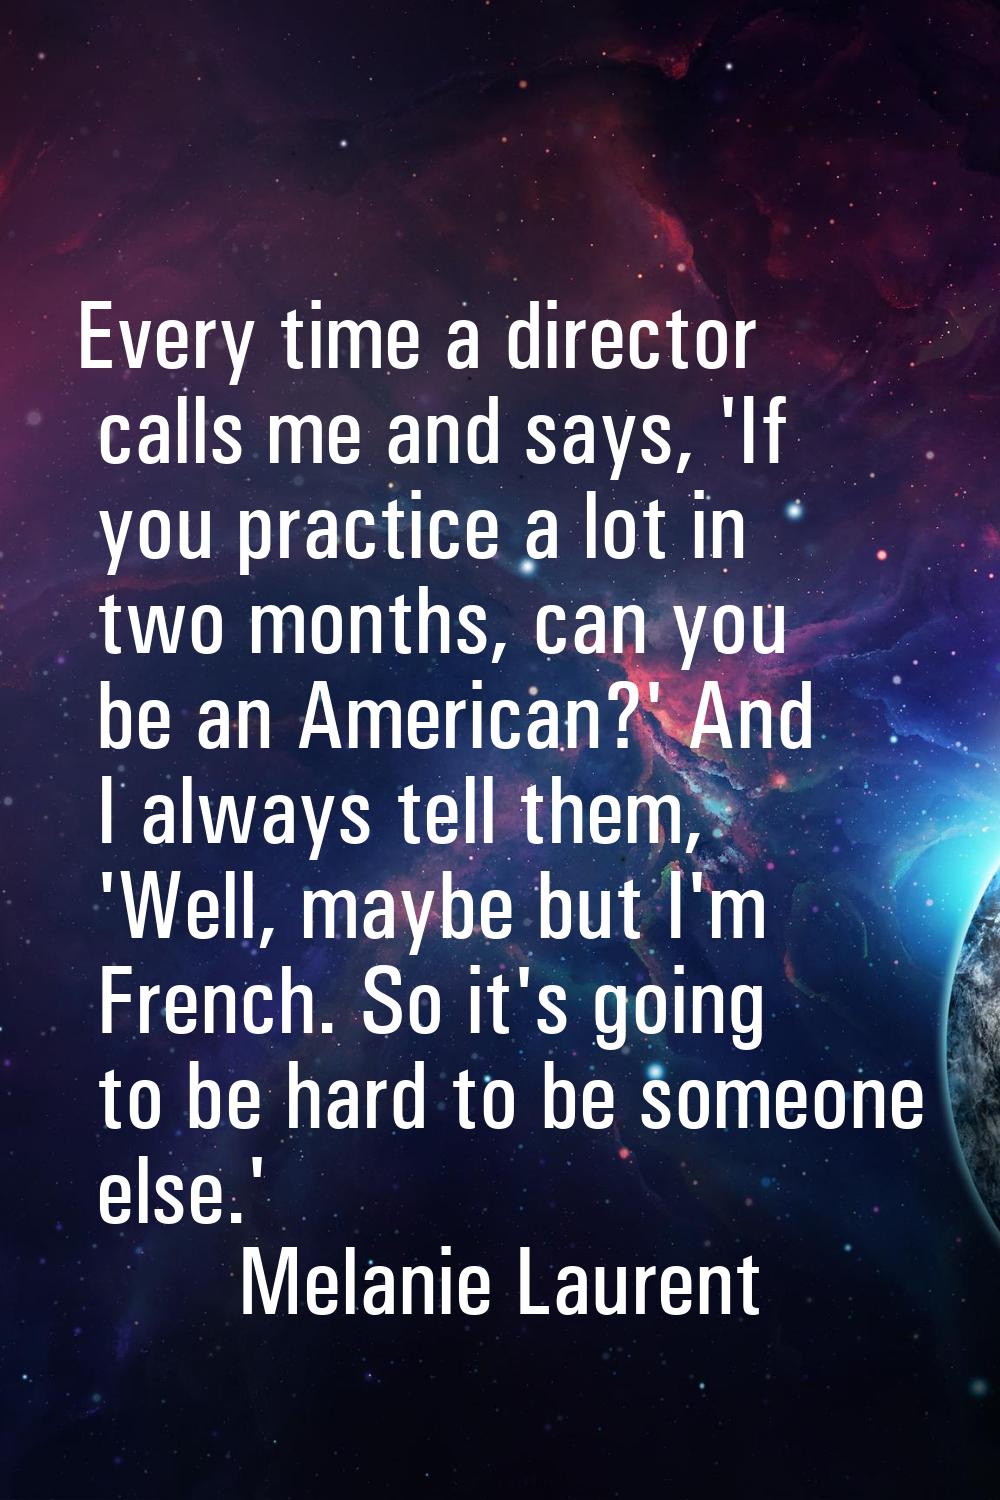 Every time a director calls me and says, 'If you practice a lot in two months, can you be an Americ